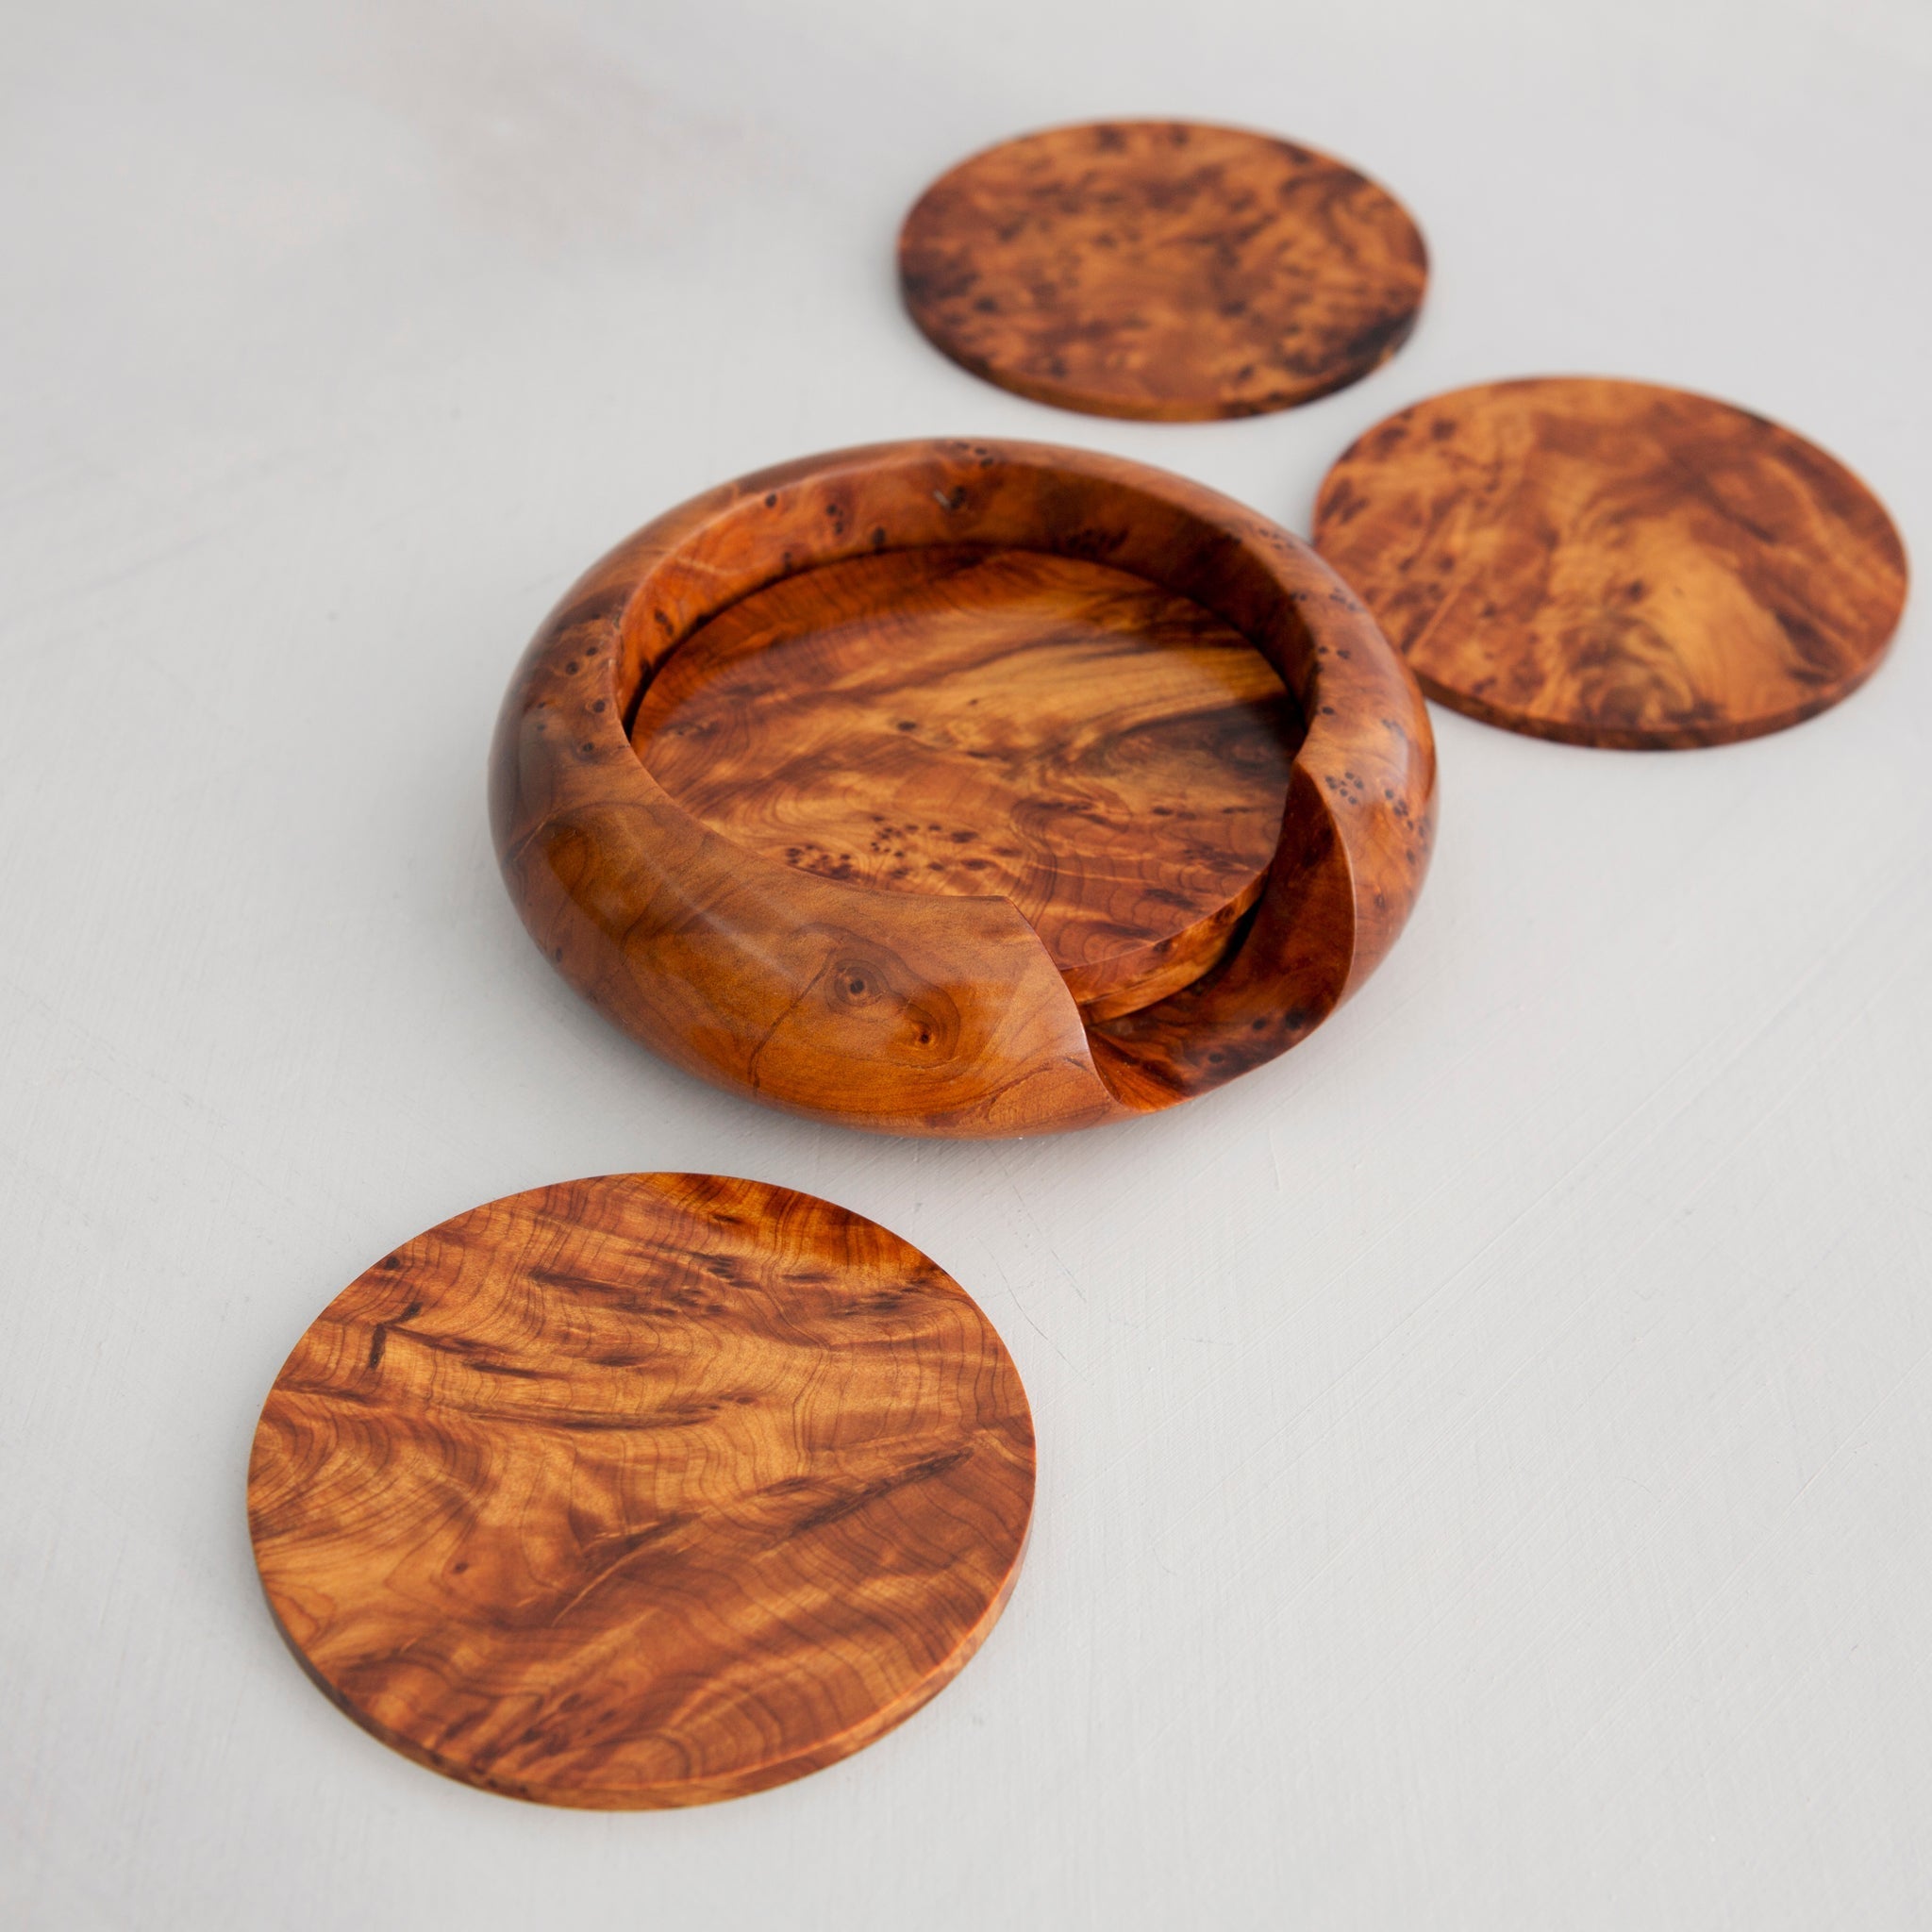 6 Coasters And Holder - The Nancy Smillie Shop - Art, Jewellery & Designer Gifts Glasgow